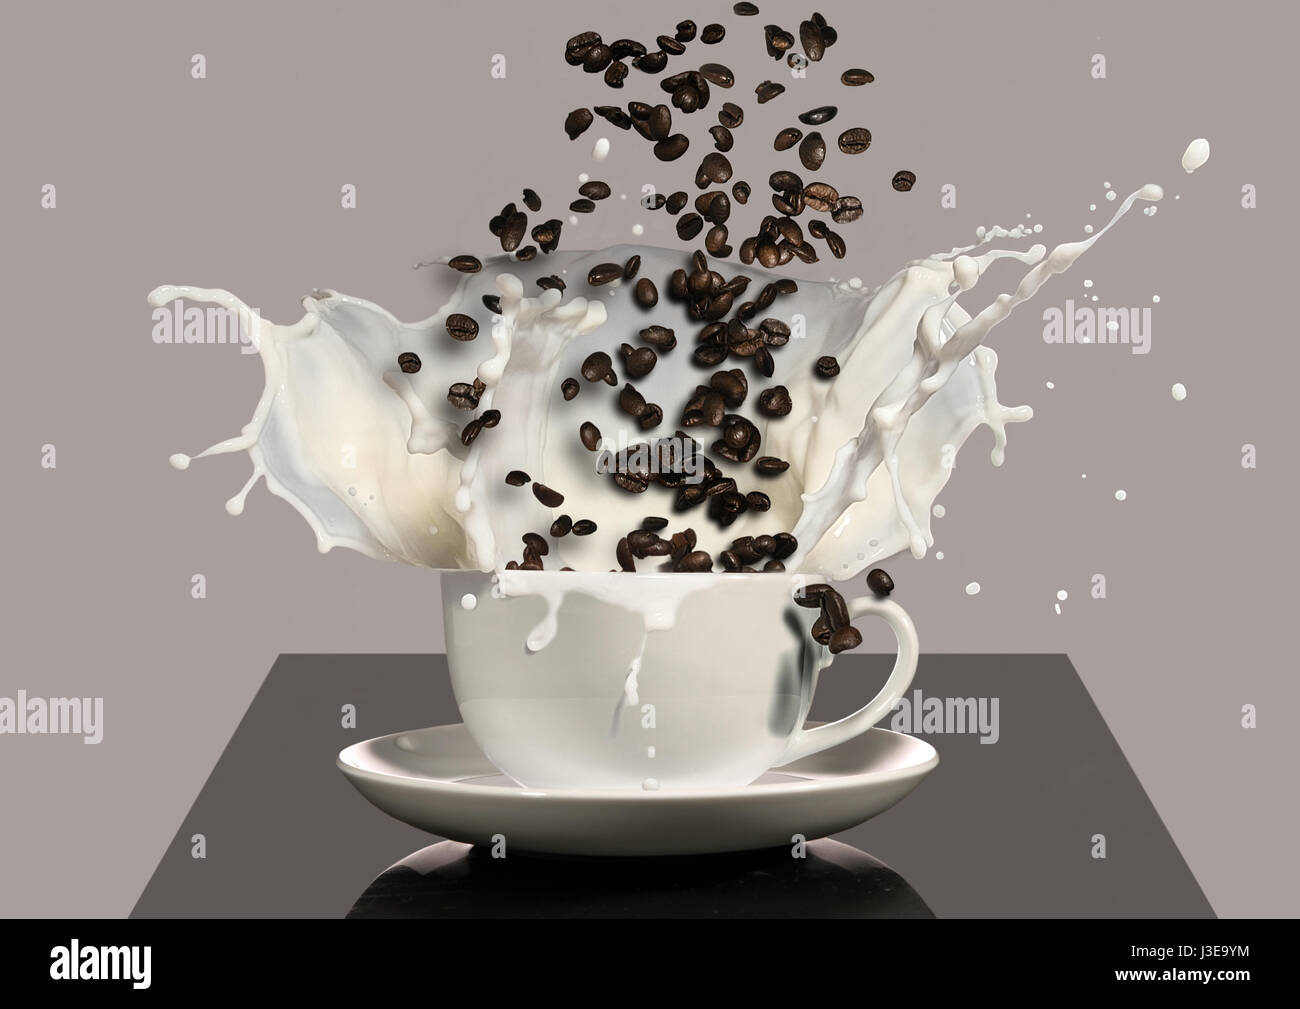 InstaBrew – The Anyplace, Anywhere, Anytime Coffee – Splash Magazines